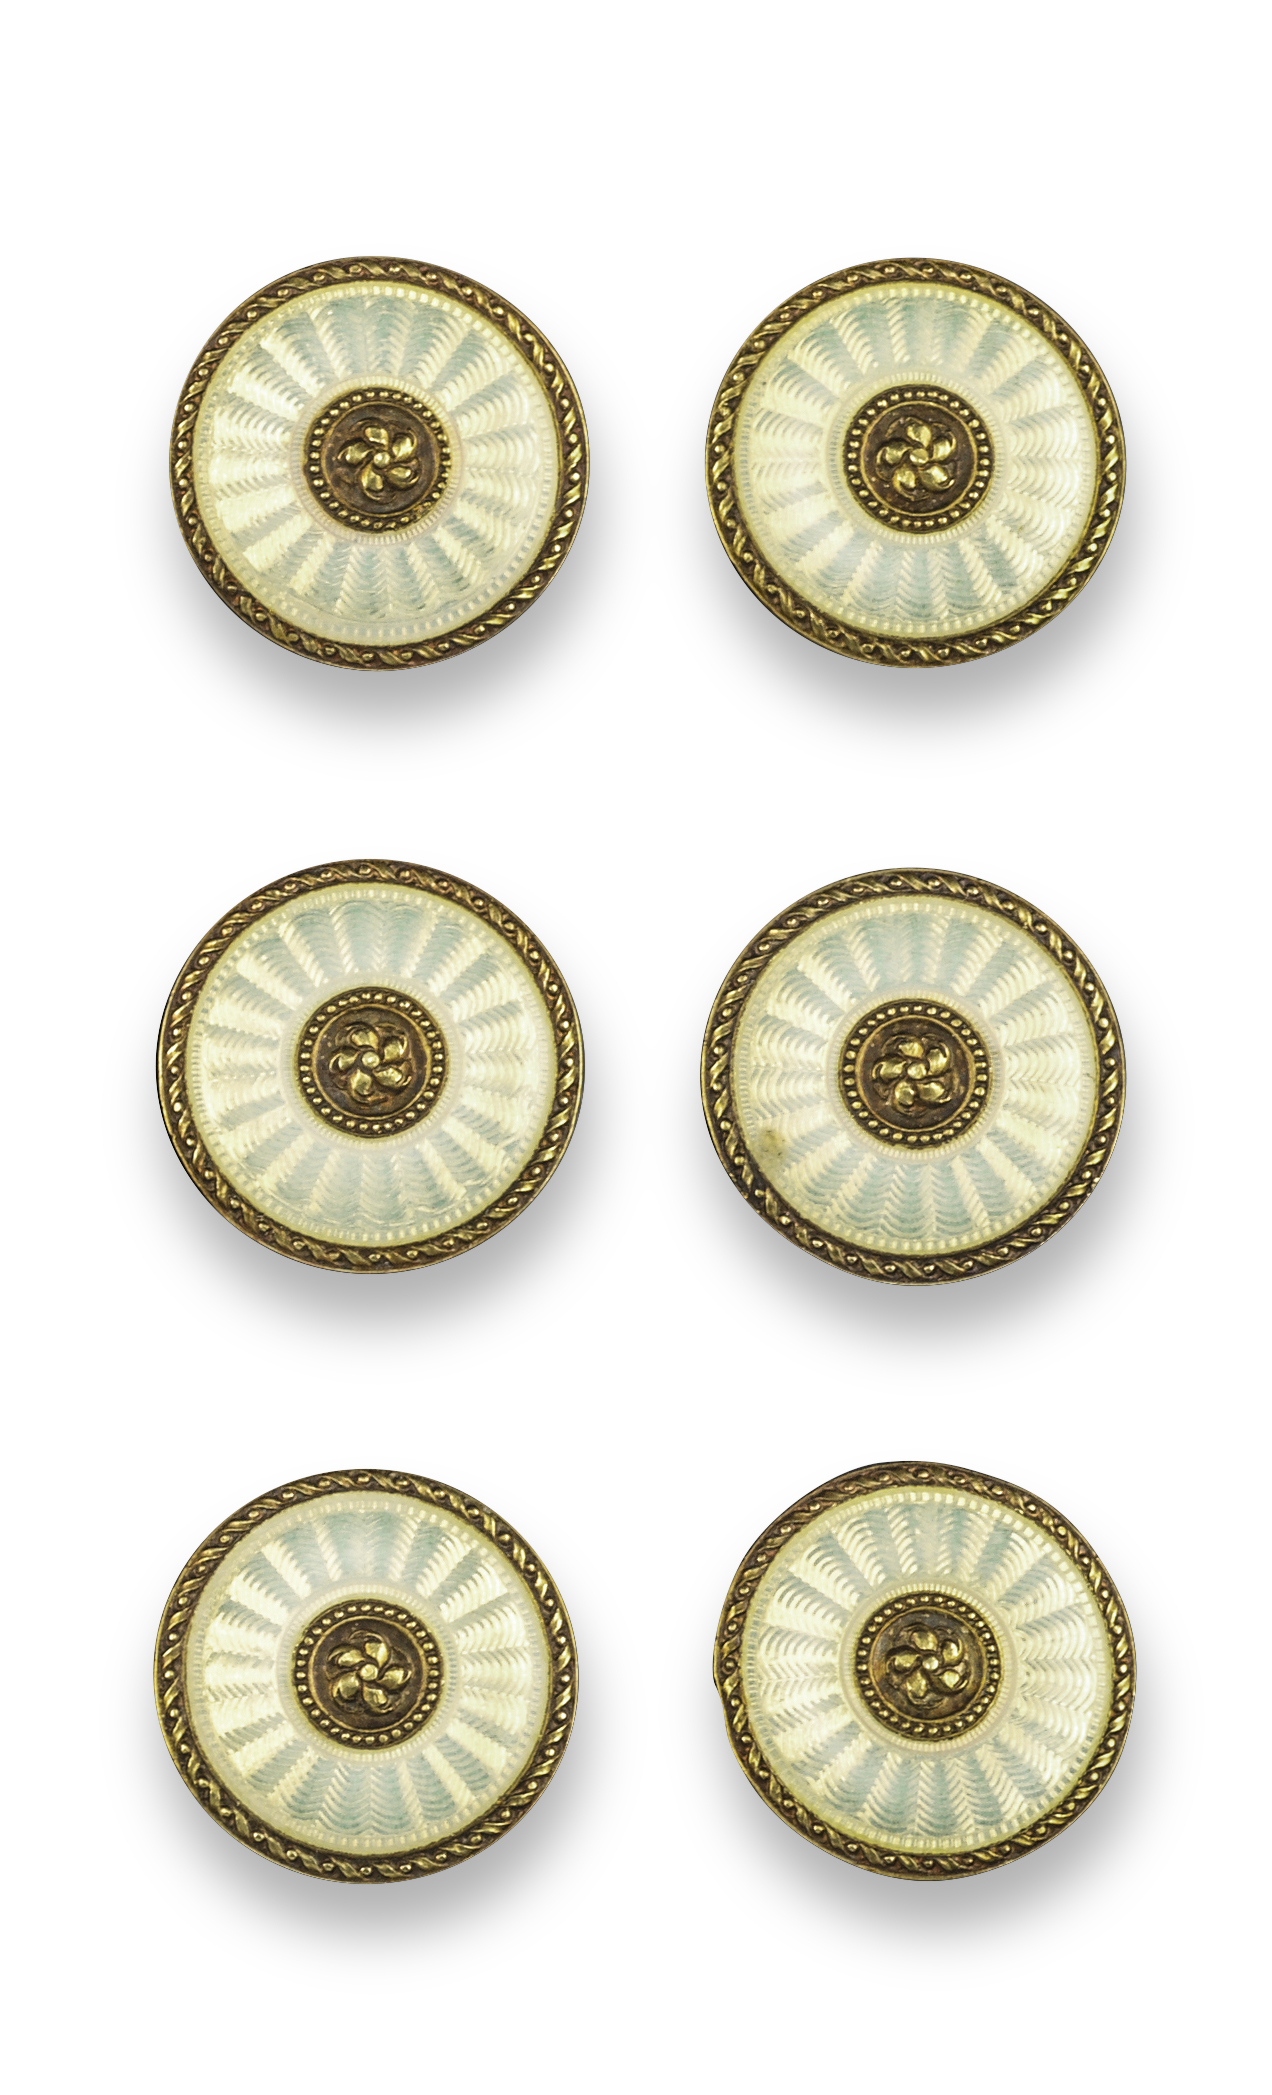 A set of six late 19th century French enamel gold buttons, each circular gold button with a